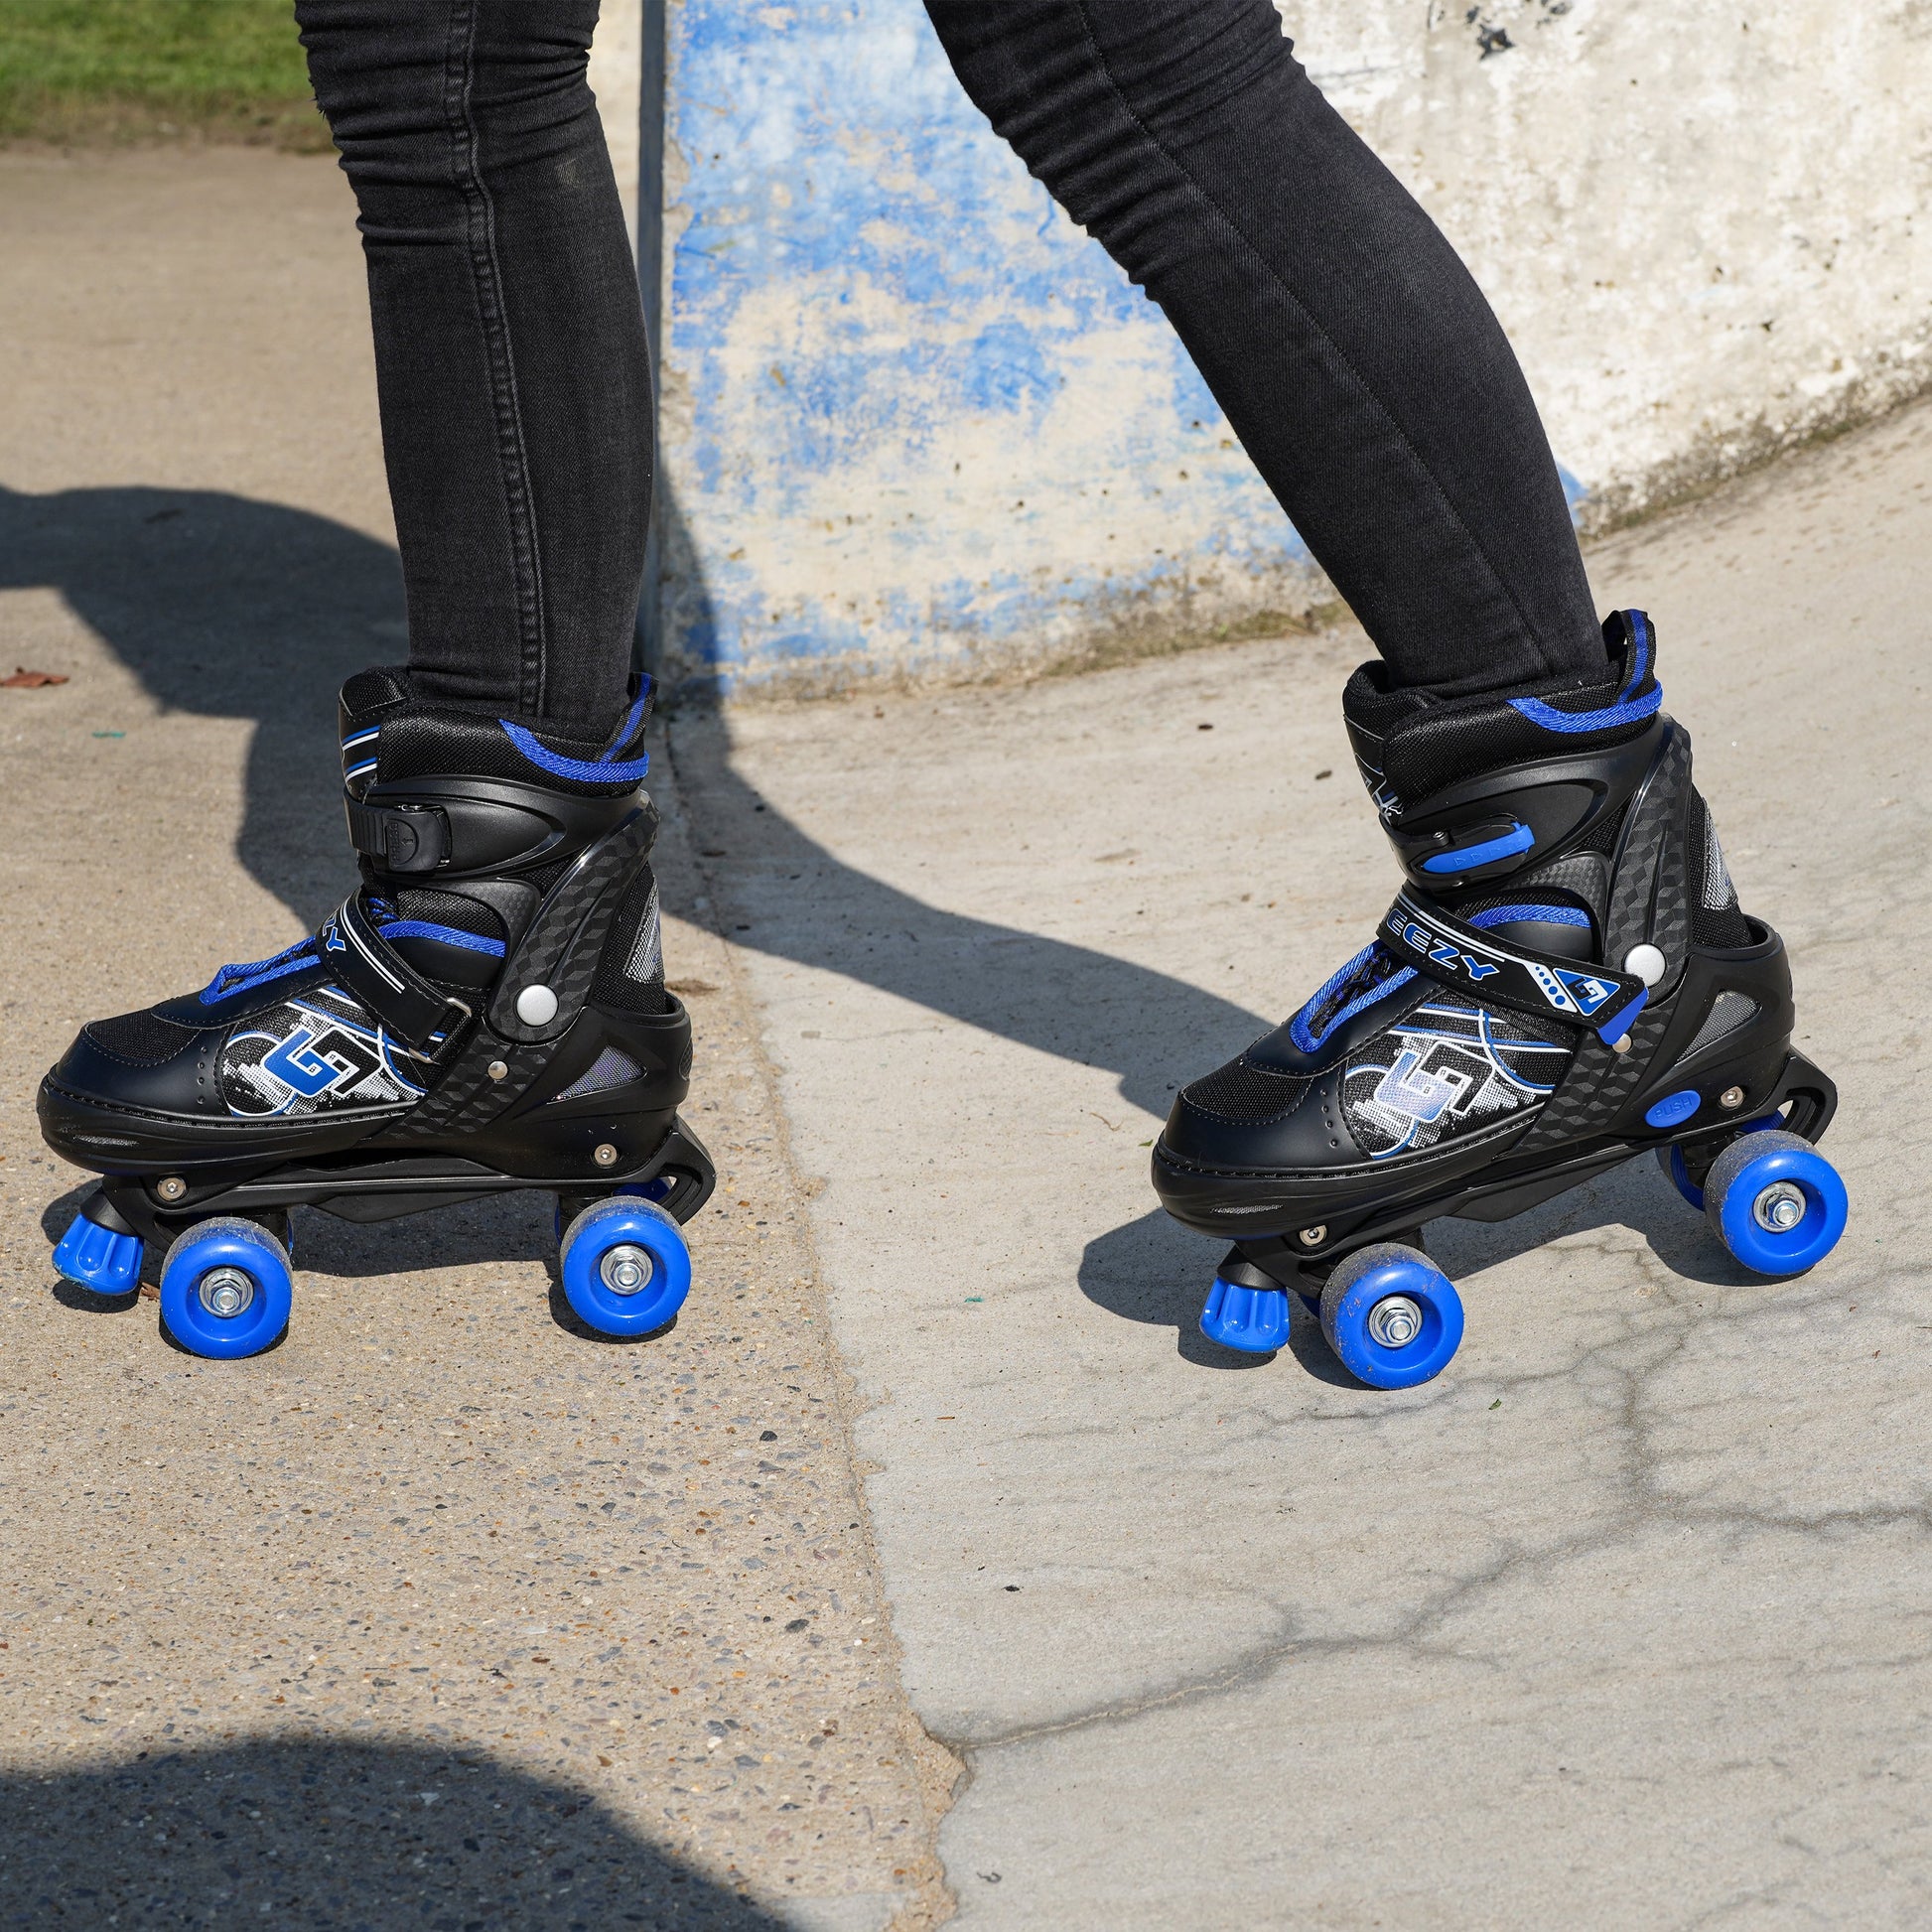 The Magic Toy Shop Roller Skate Blue and Black Roller Skates for Kids with 4 Wheel